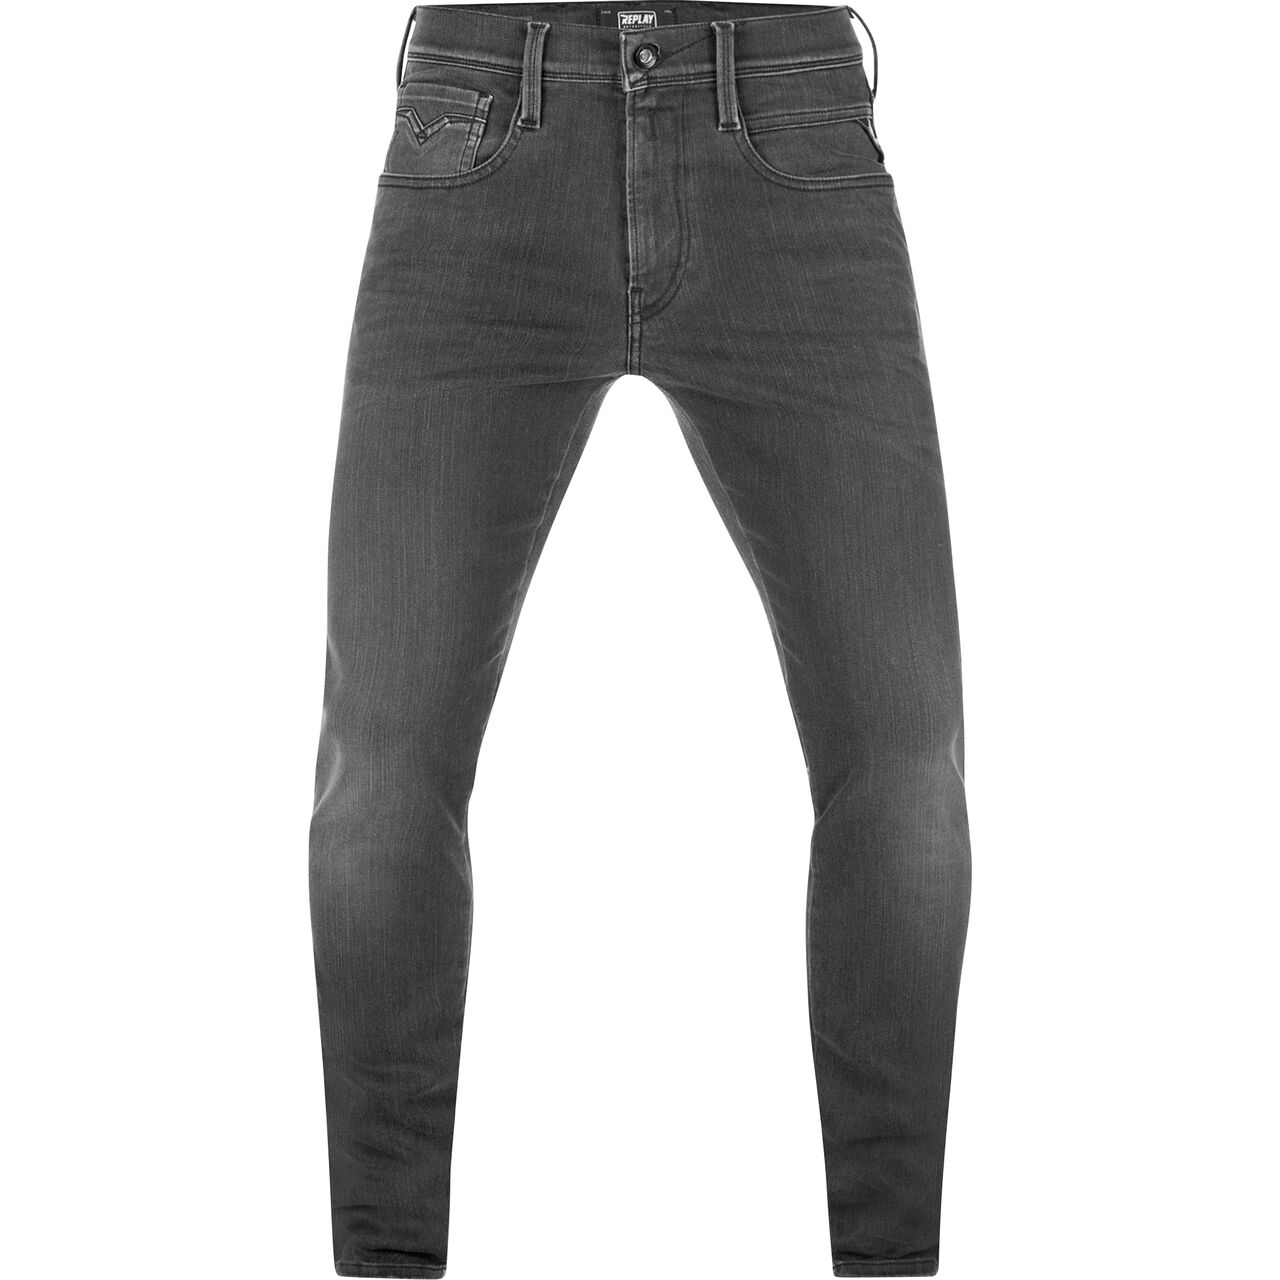 Chain Jeans grey